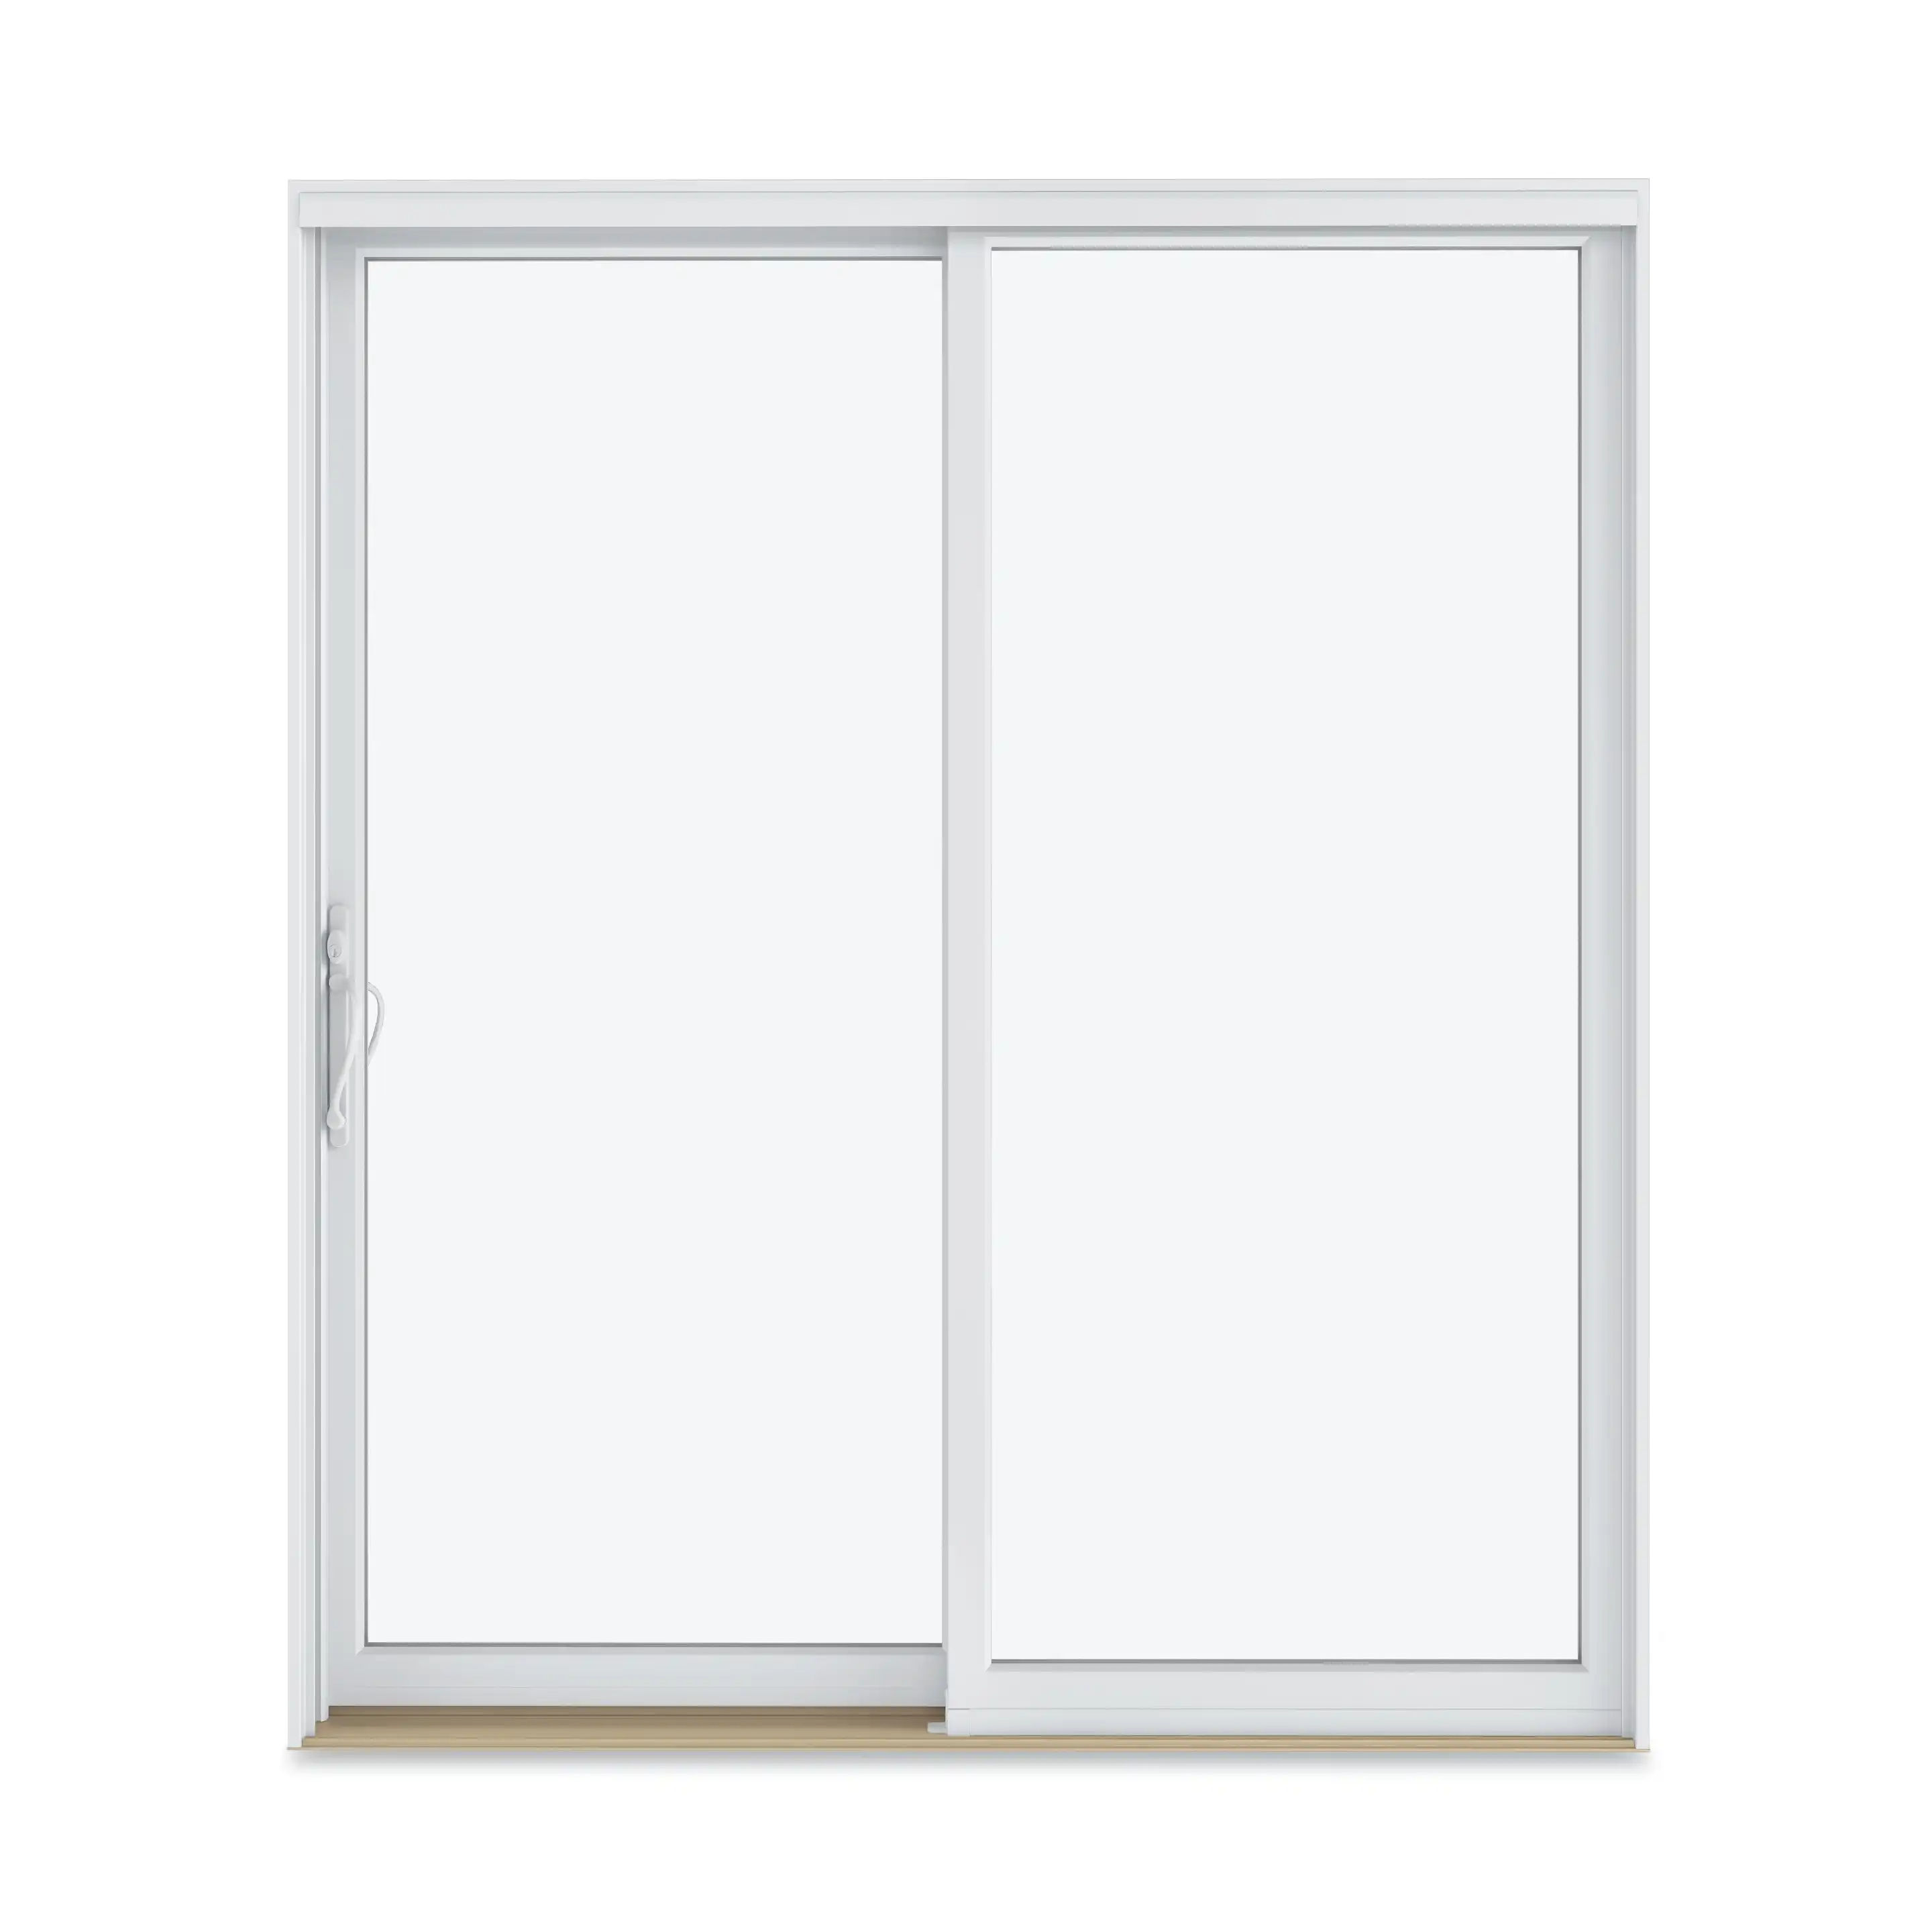 White Marvin Replacement two-panel sliding glass door.